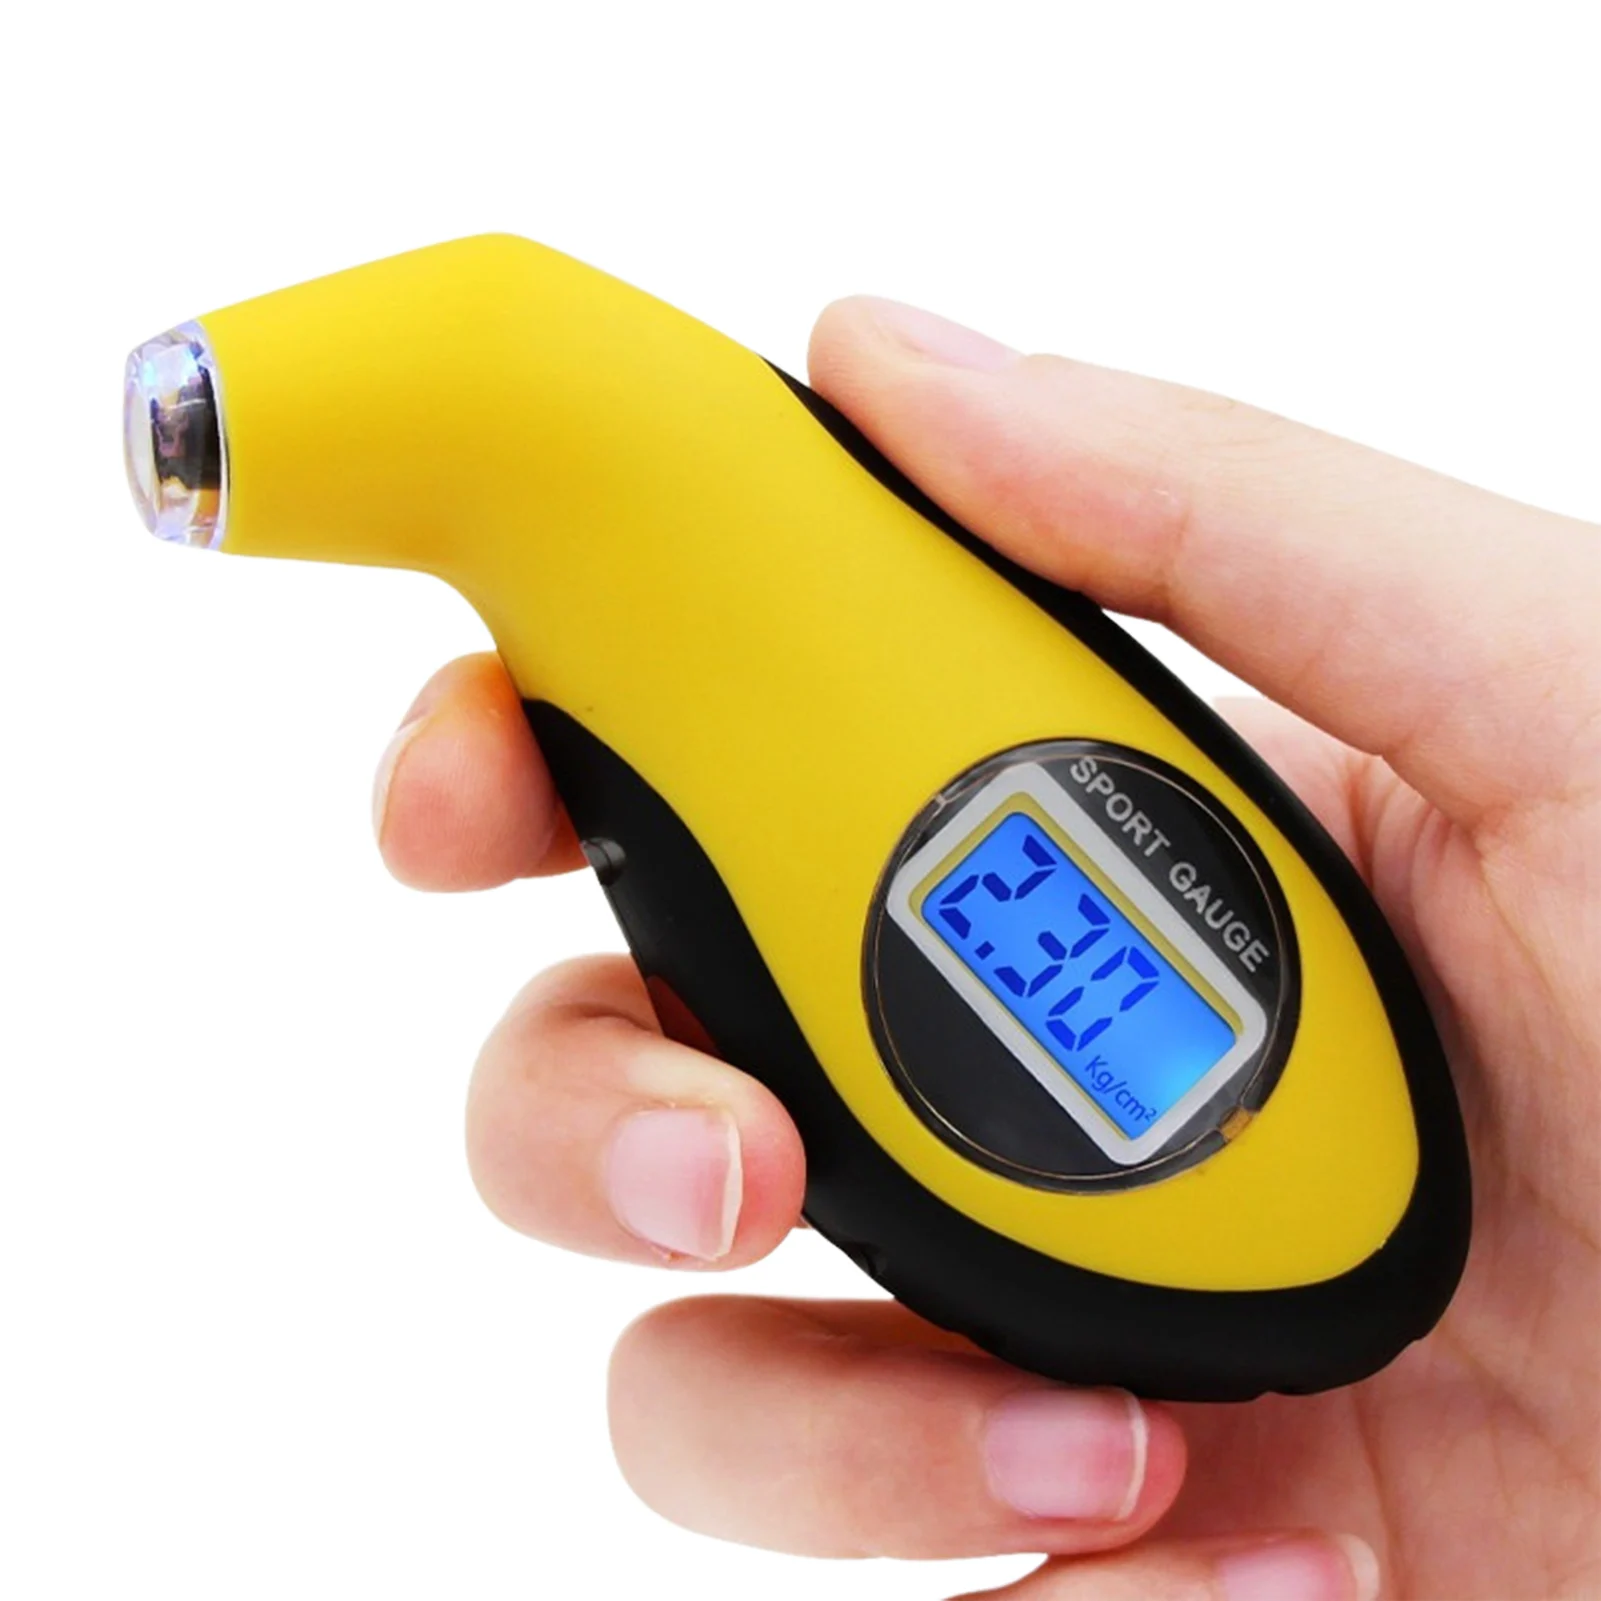 Winbang Tyre Pressure Gauges 150 PSI Tester Tool with Backlight for Truck Auto Vehicle 